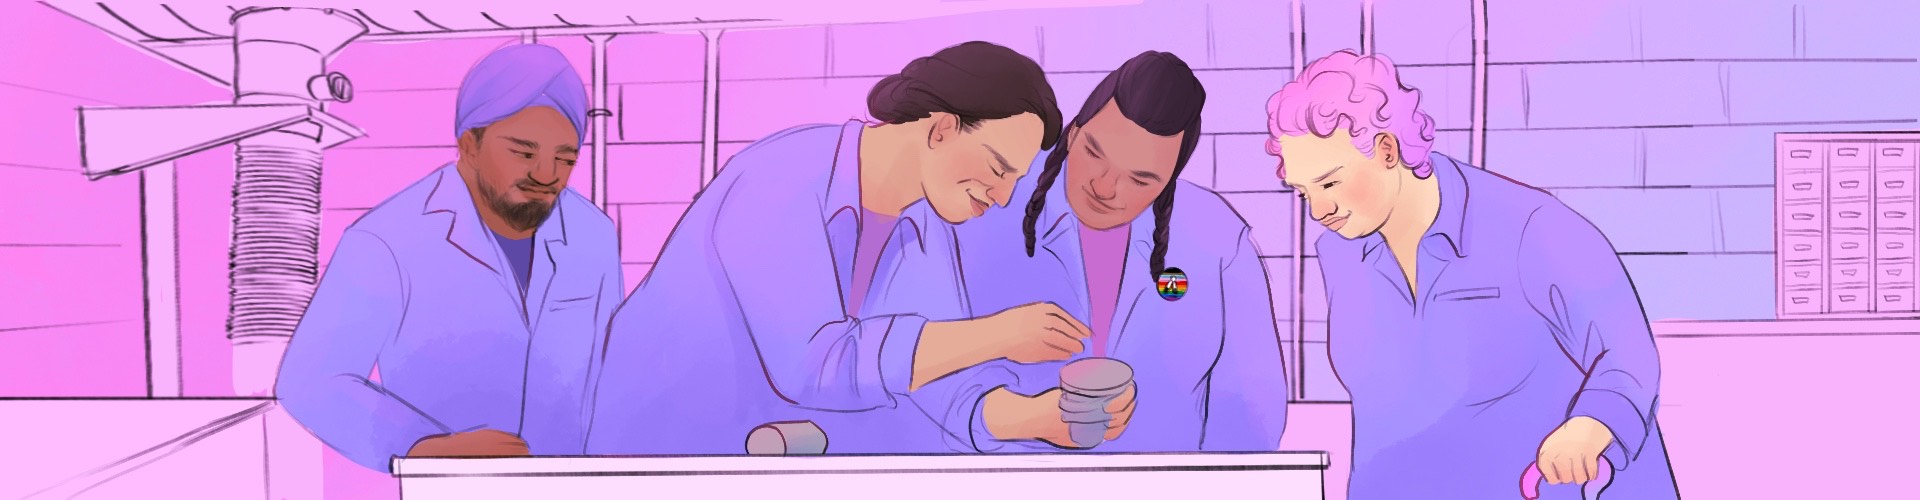 A bright illustration of four LGBTQ+ people in a laboratory. Three young people are being learning a new skill from the teacher.